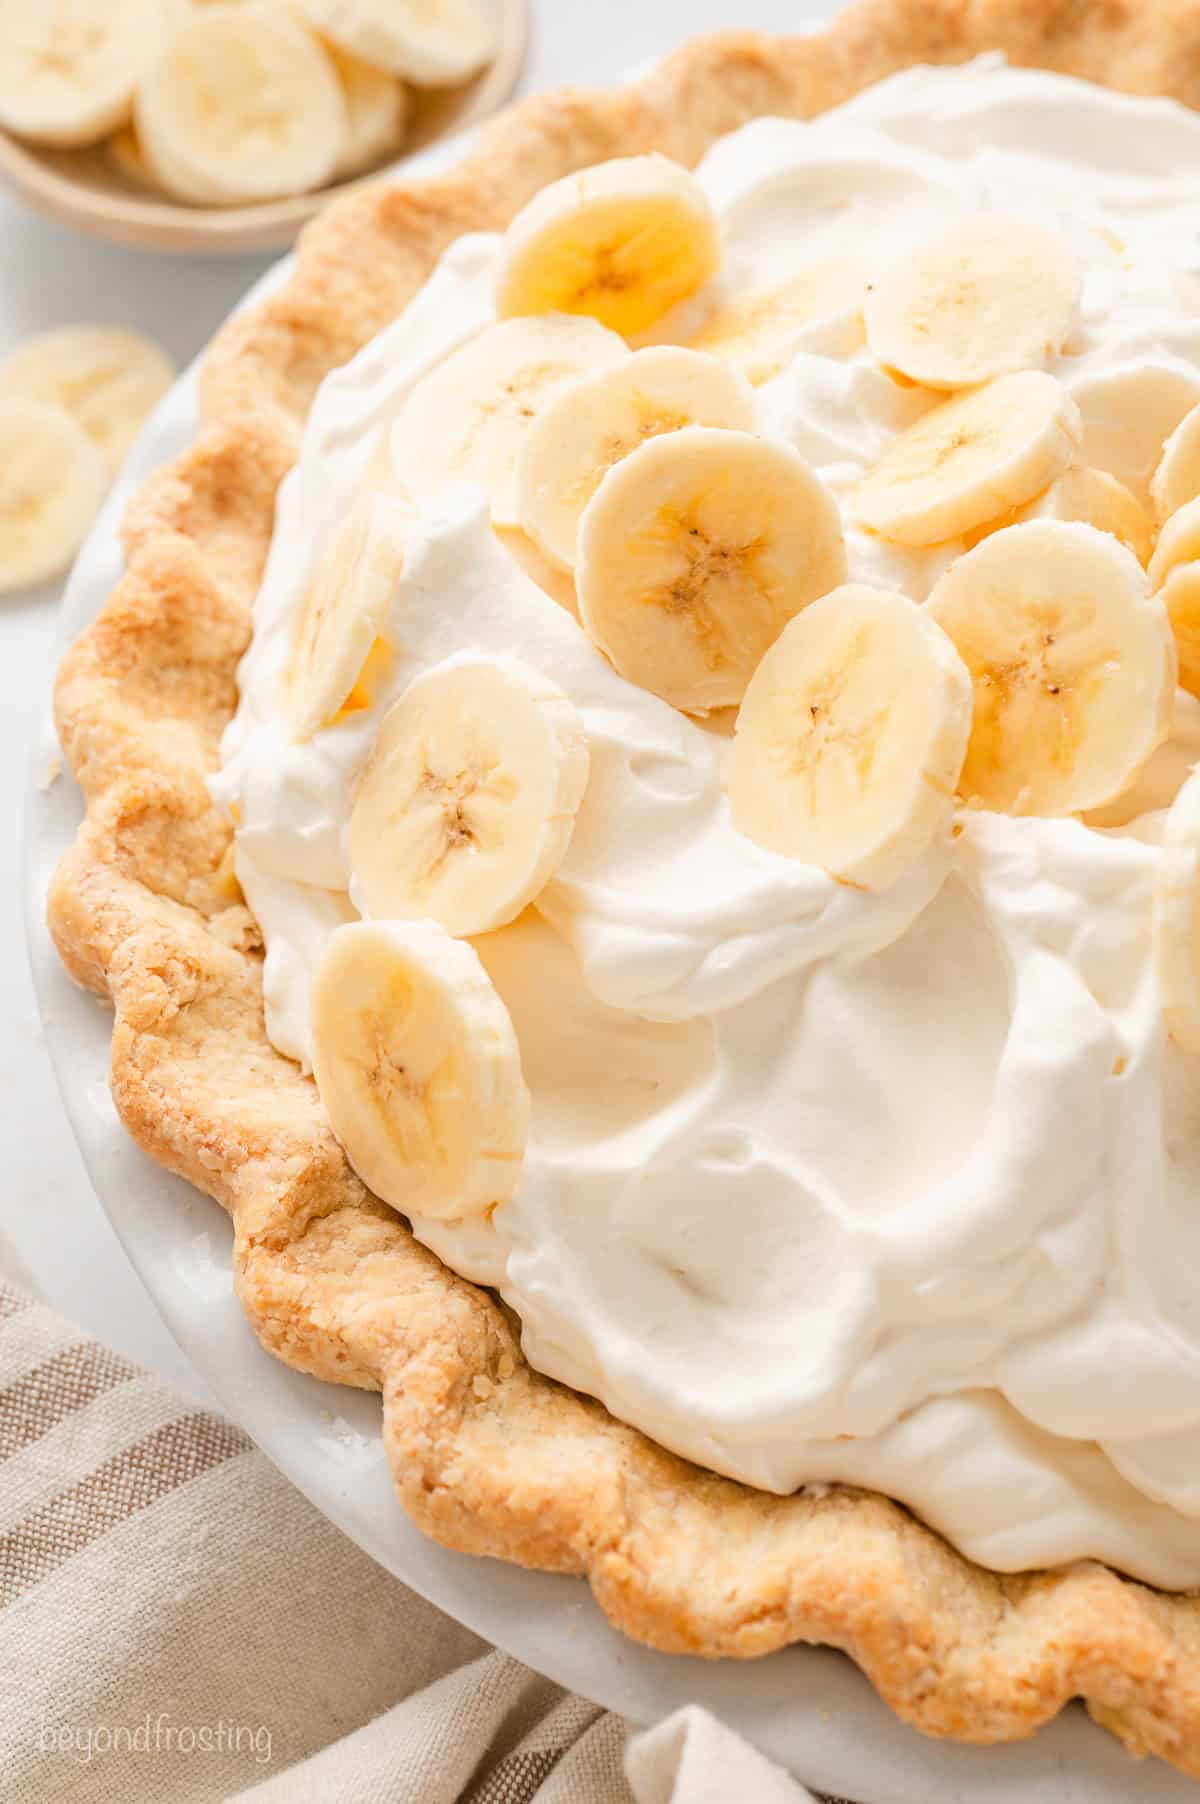 Overhead view of a whole banana cream pie garnished with banana slices.